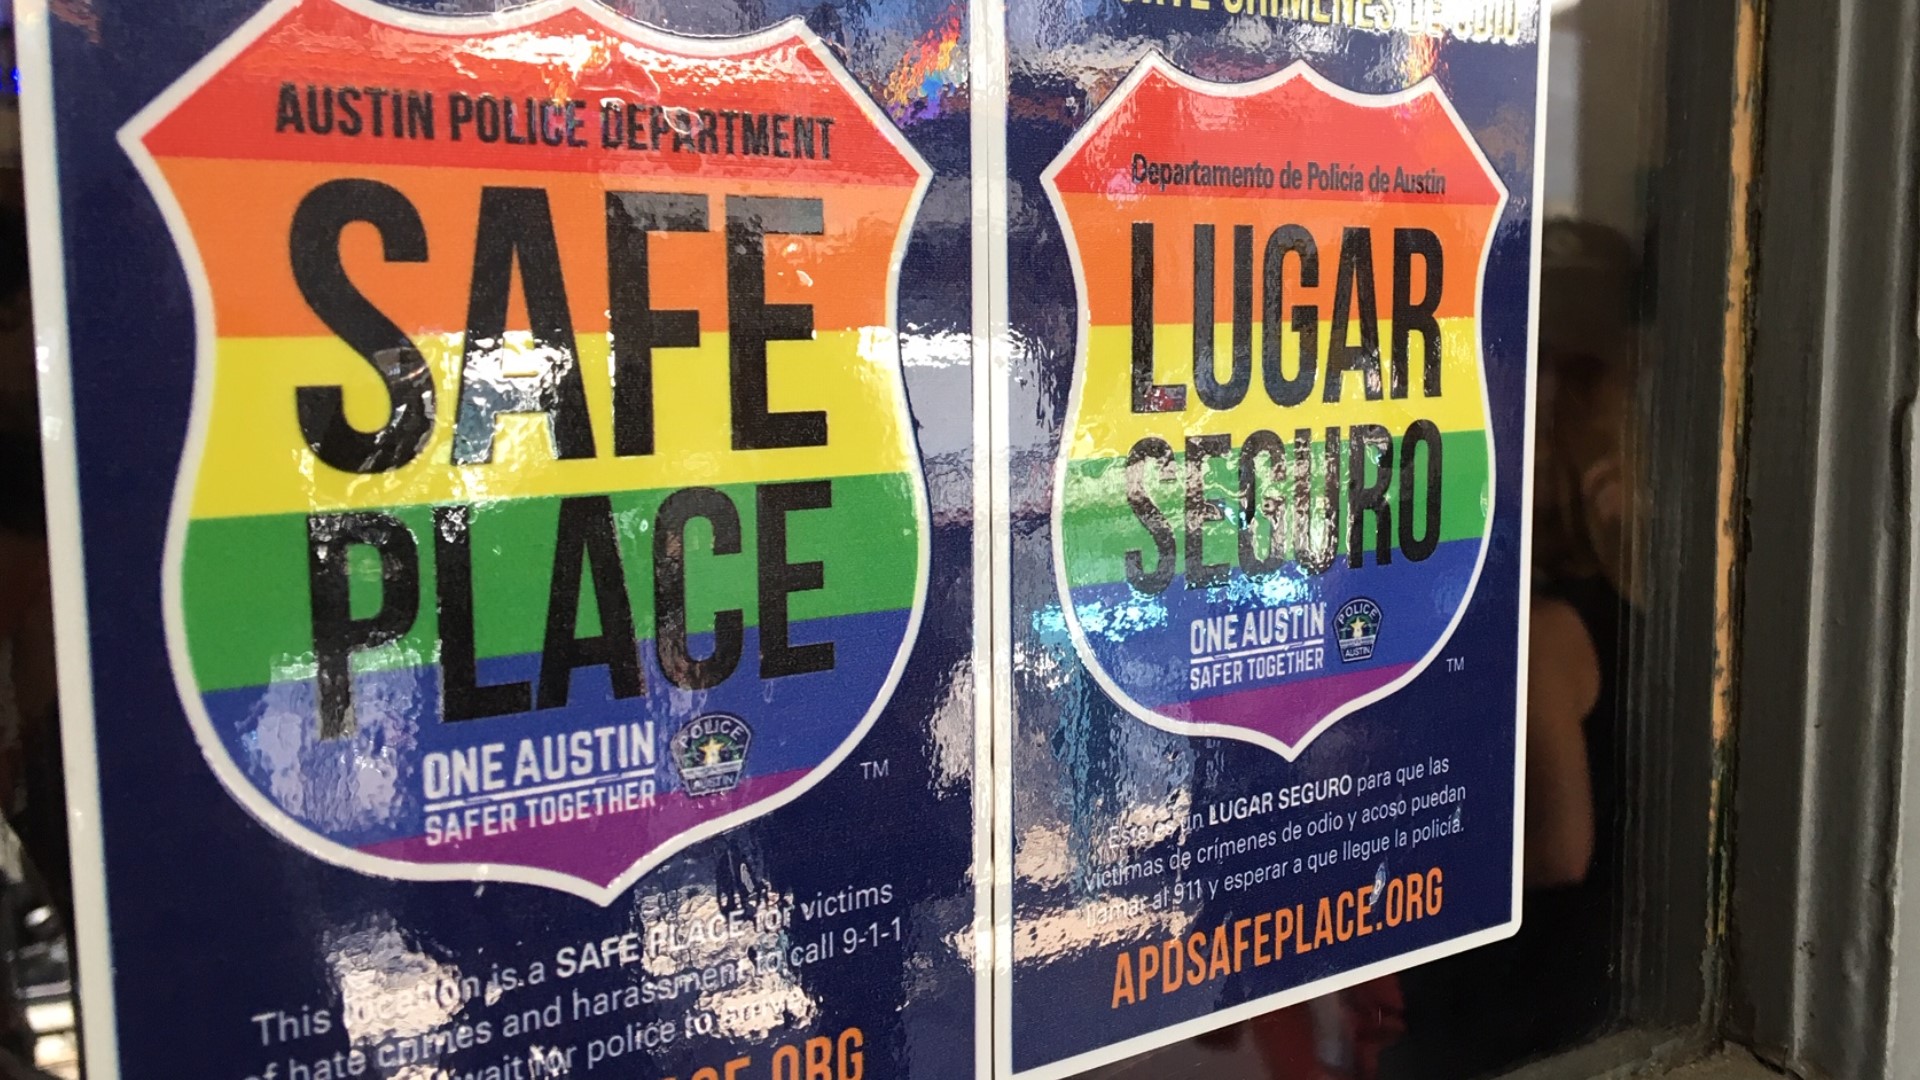 Austin police are trying to increase trust with the city's LGBTQ+ population.